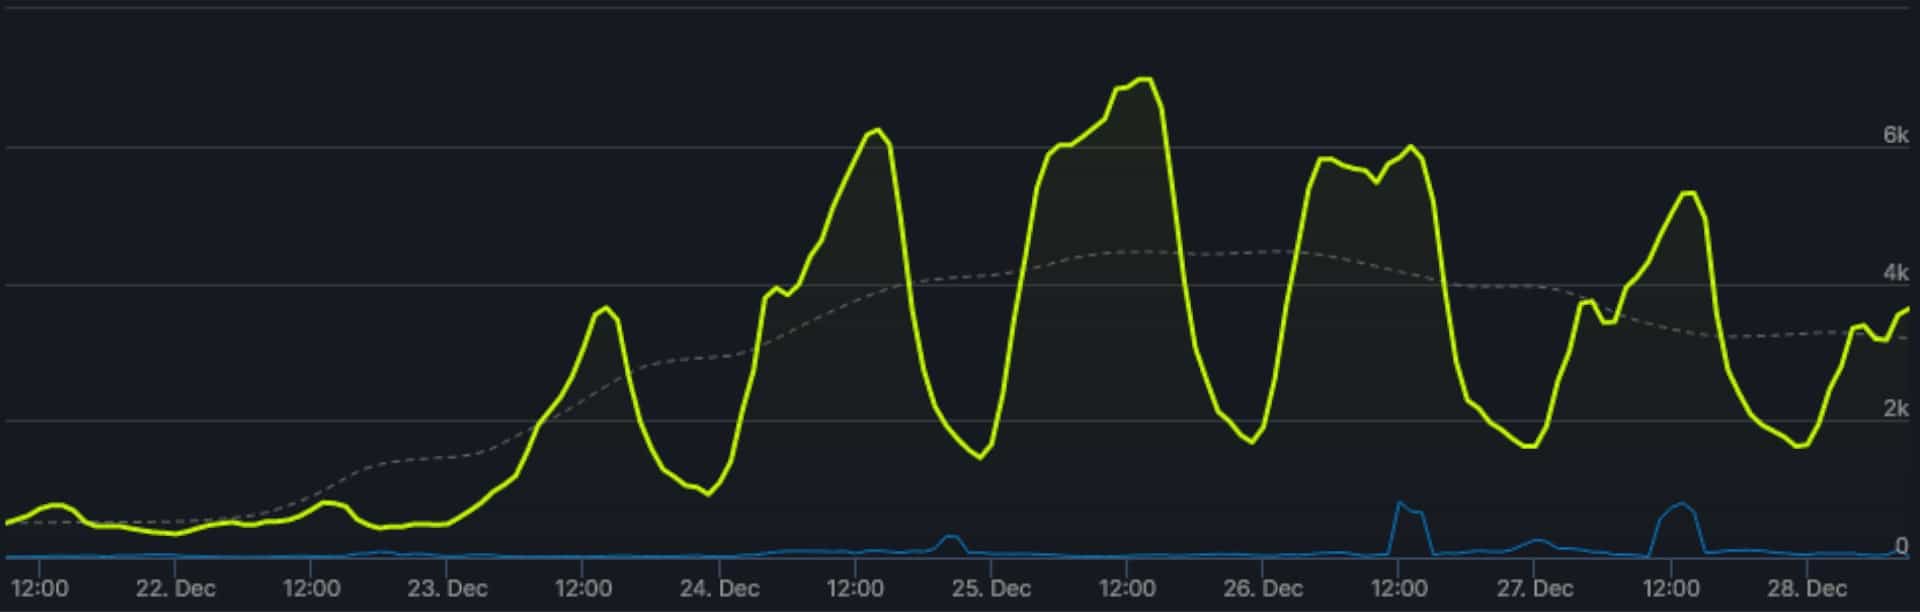 Steam player numbers are also responding to the advent of the new mod and its possibilities.